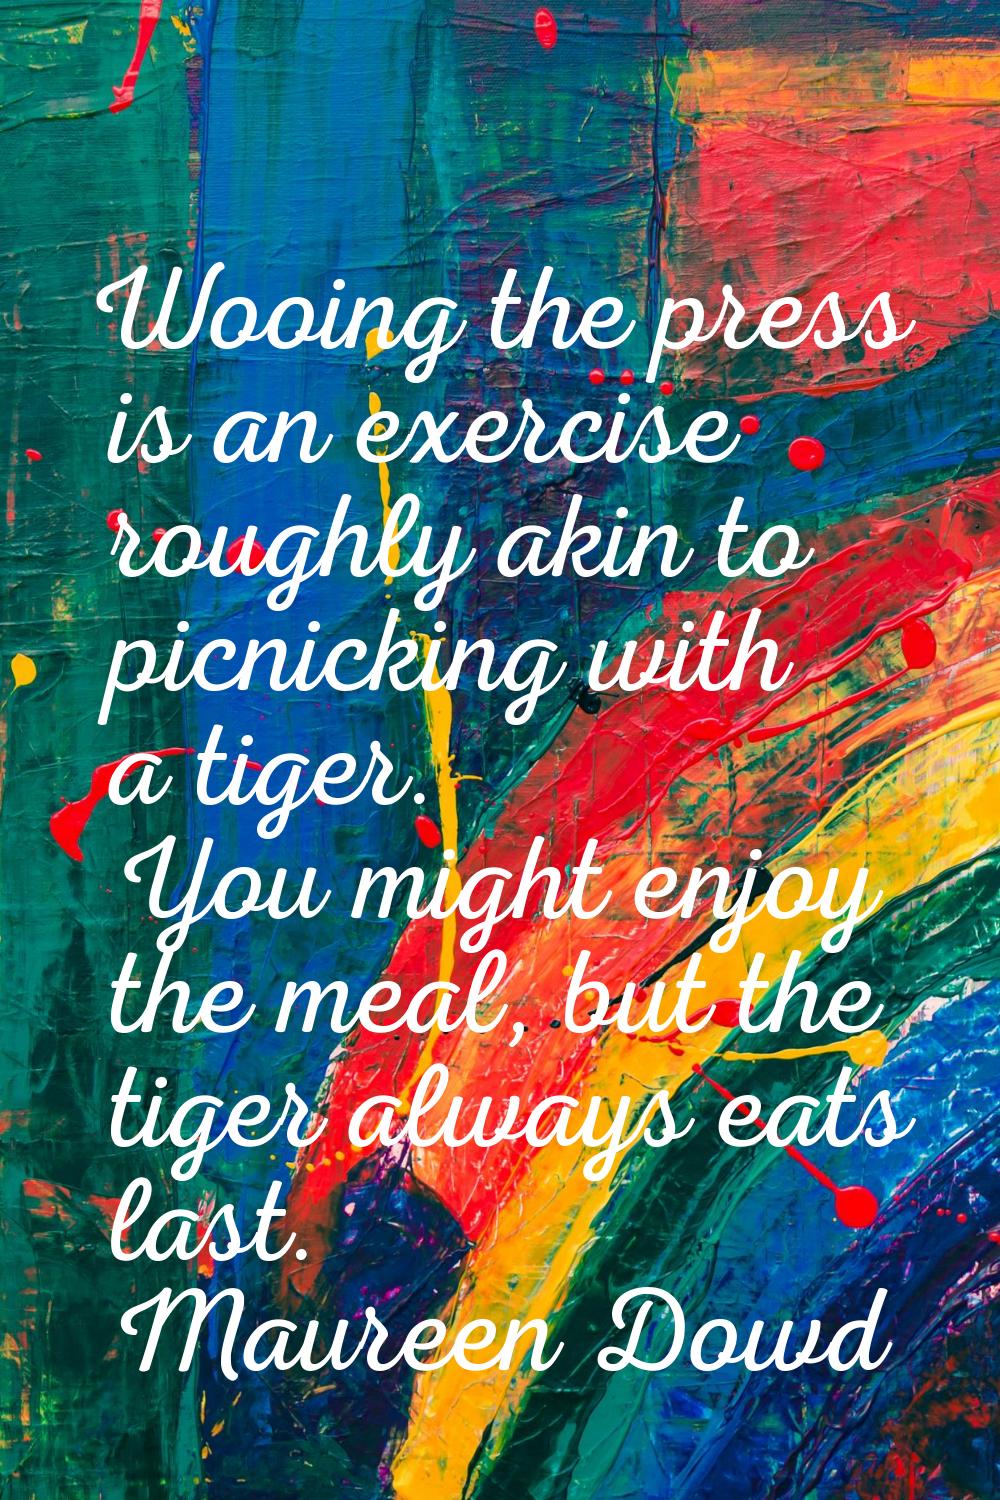 Wooing the press is an exercise roughly akin to picnicking with a tiger. You might enjoy the meal, 